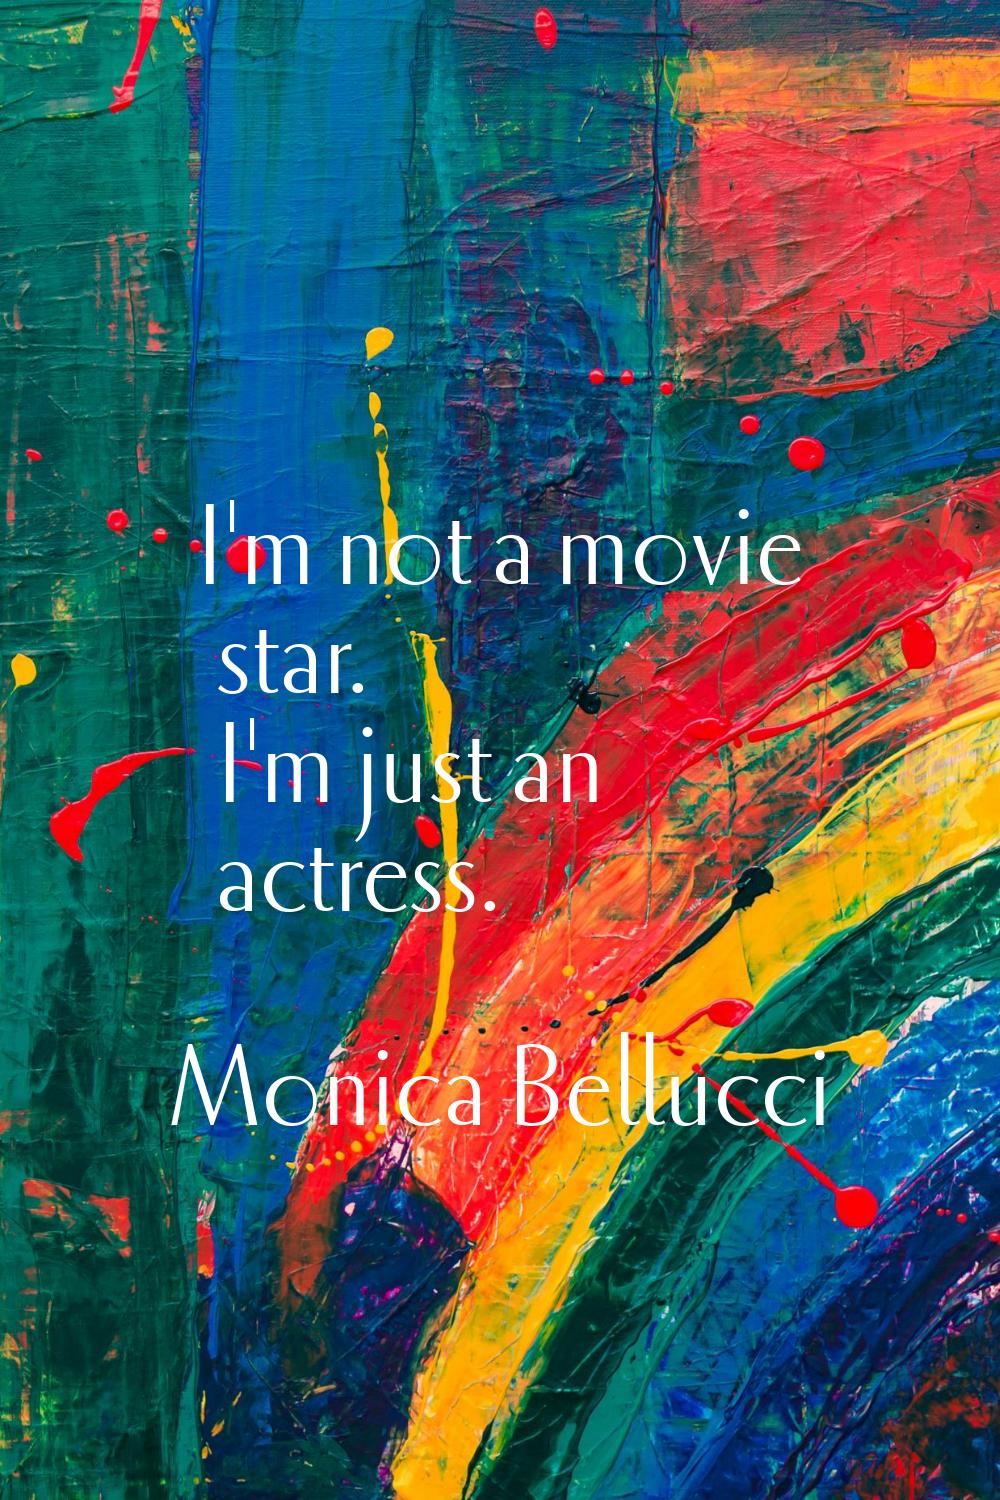 I'm not a movie star. I'm just an actress.